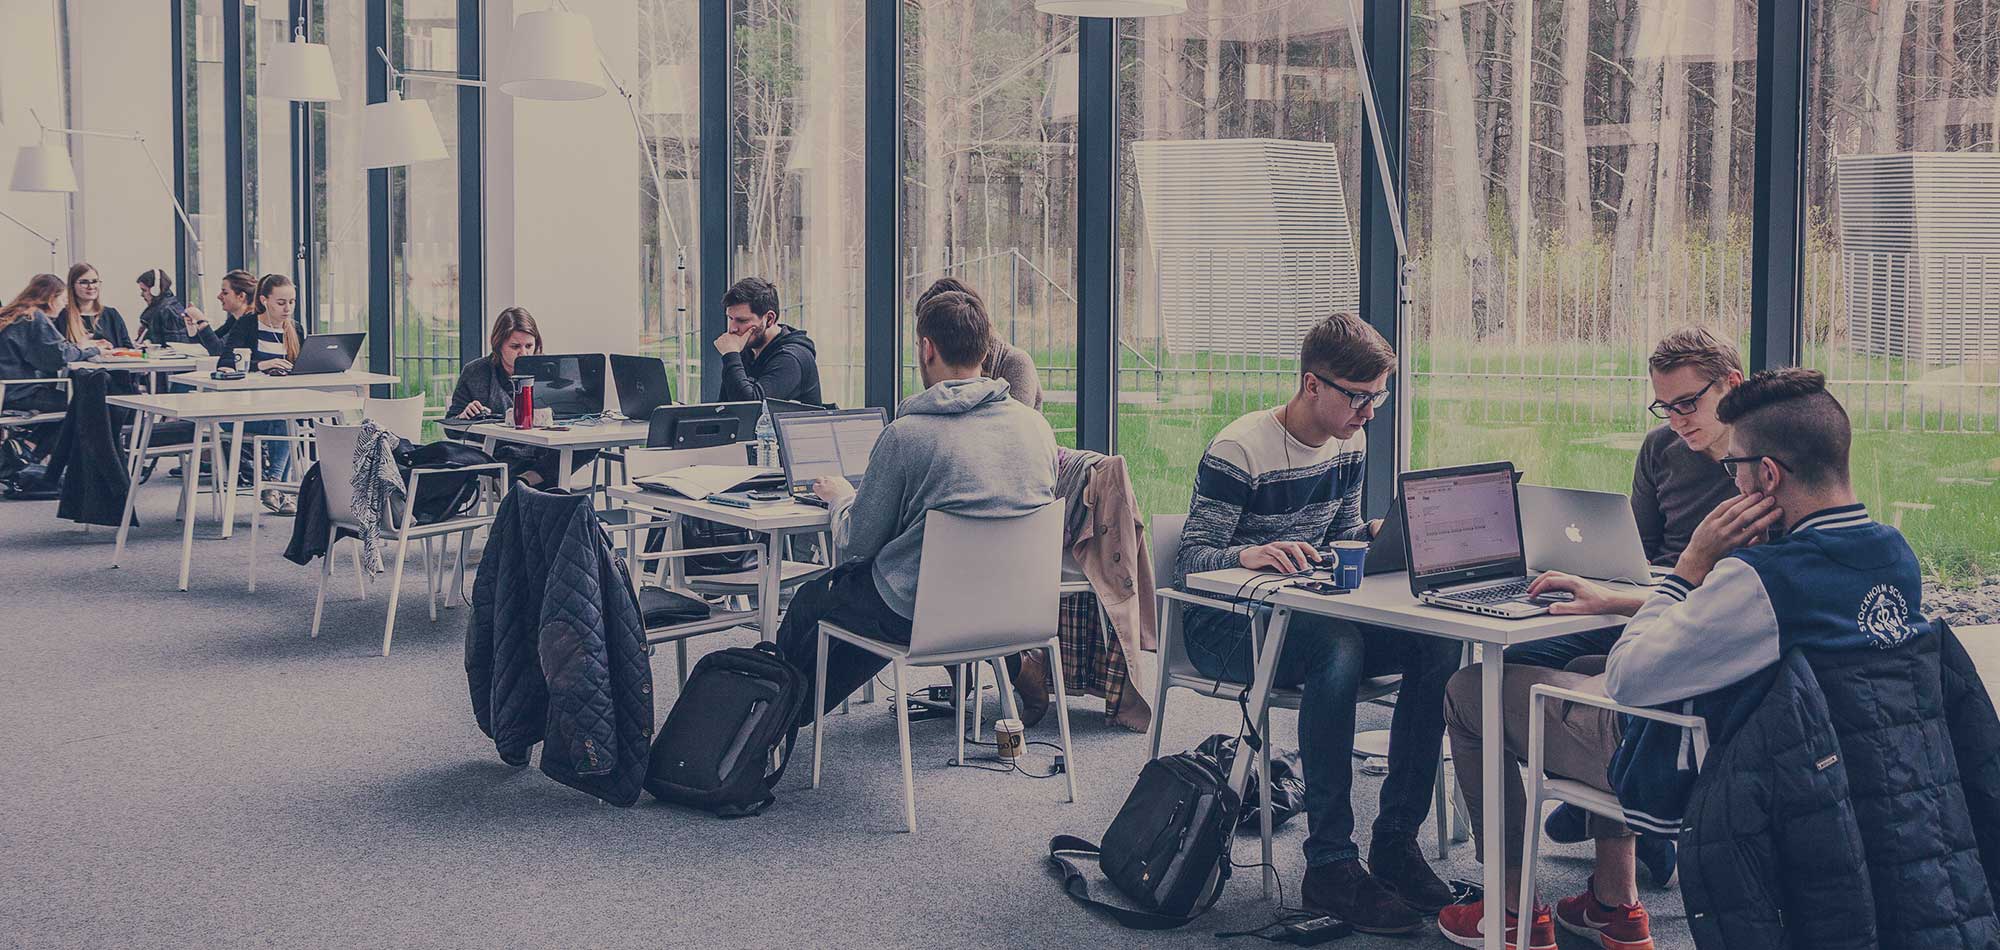 3 WLAN Design Tips that Will Improve the Campus Wi-Fi Experience